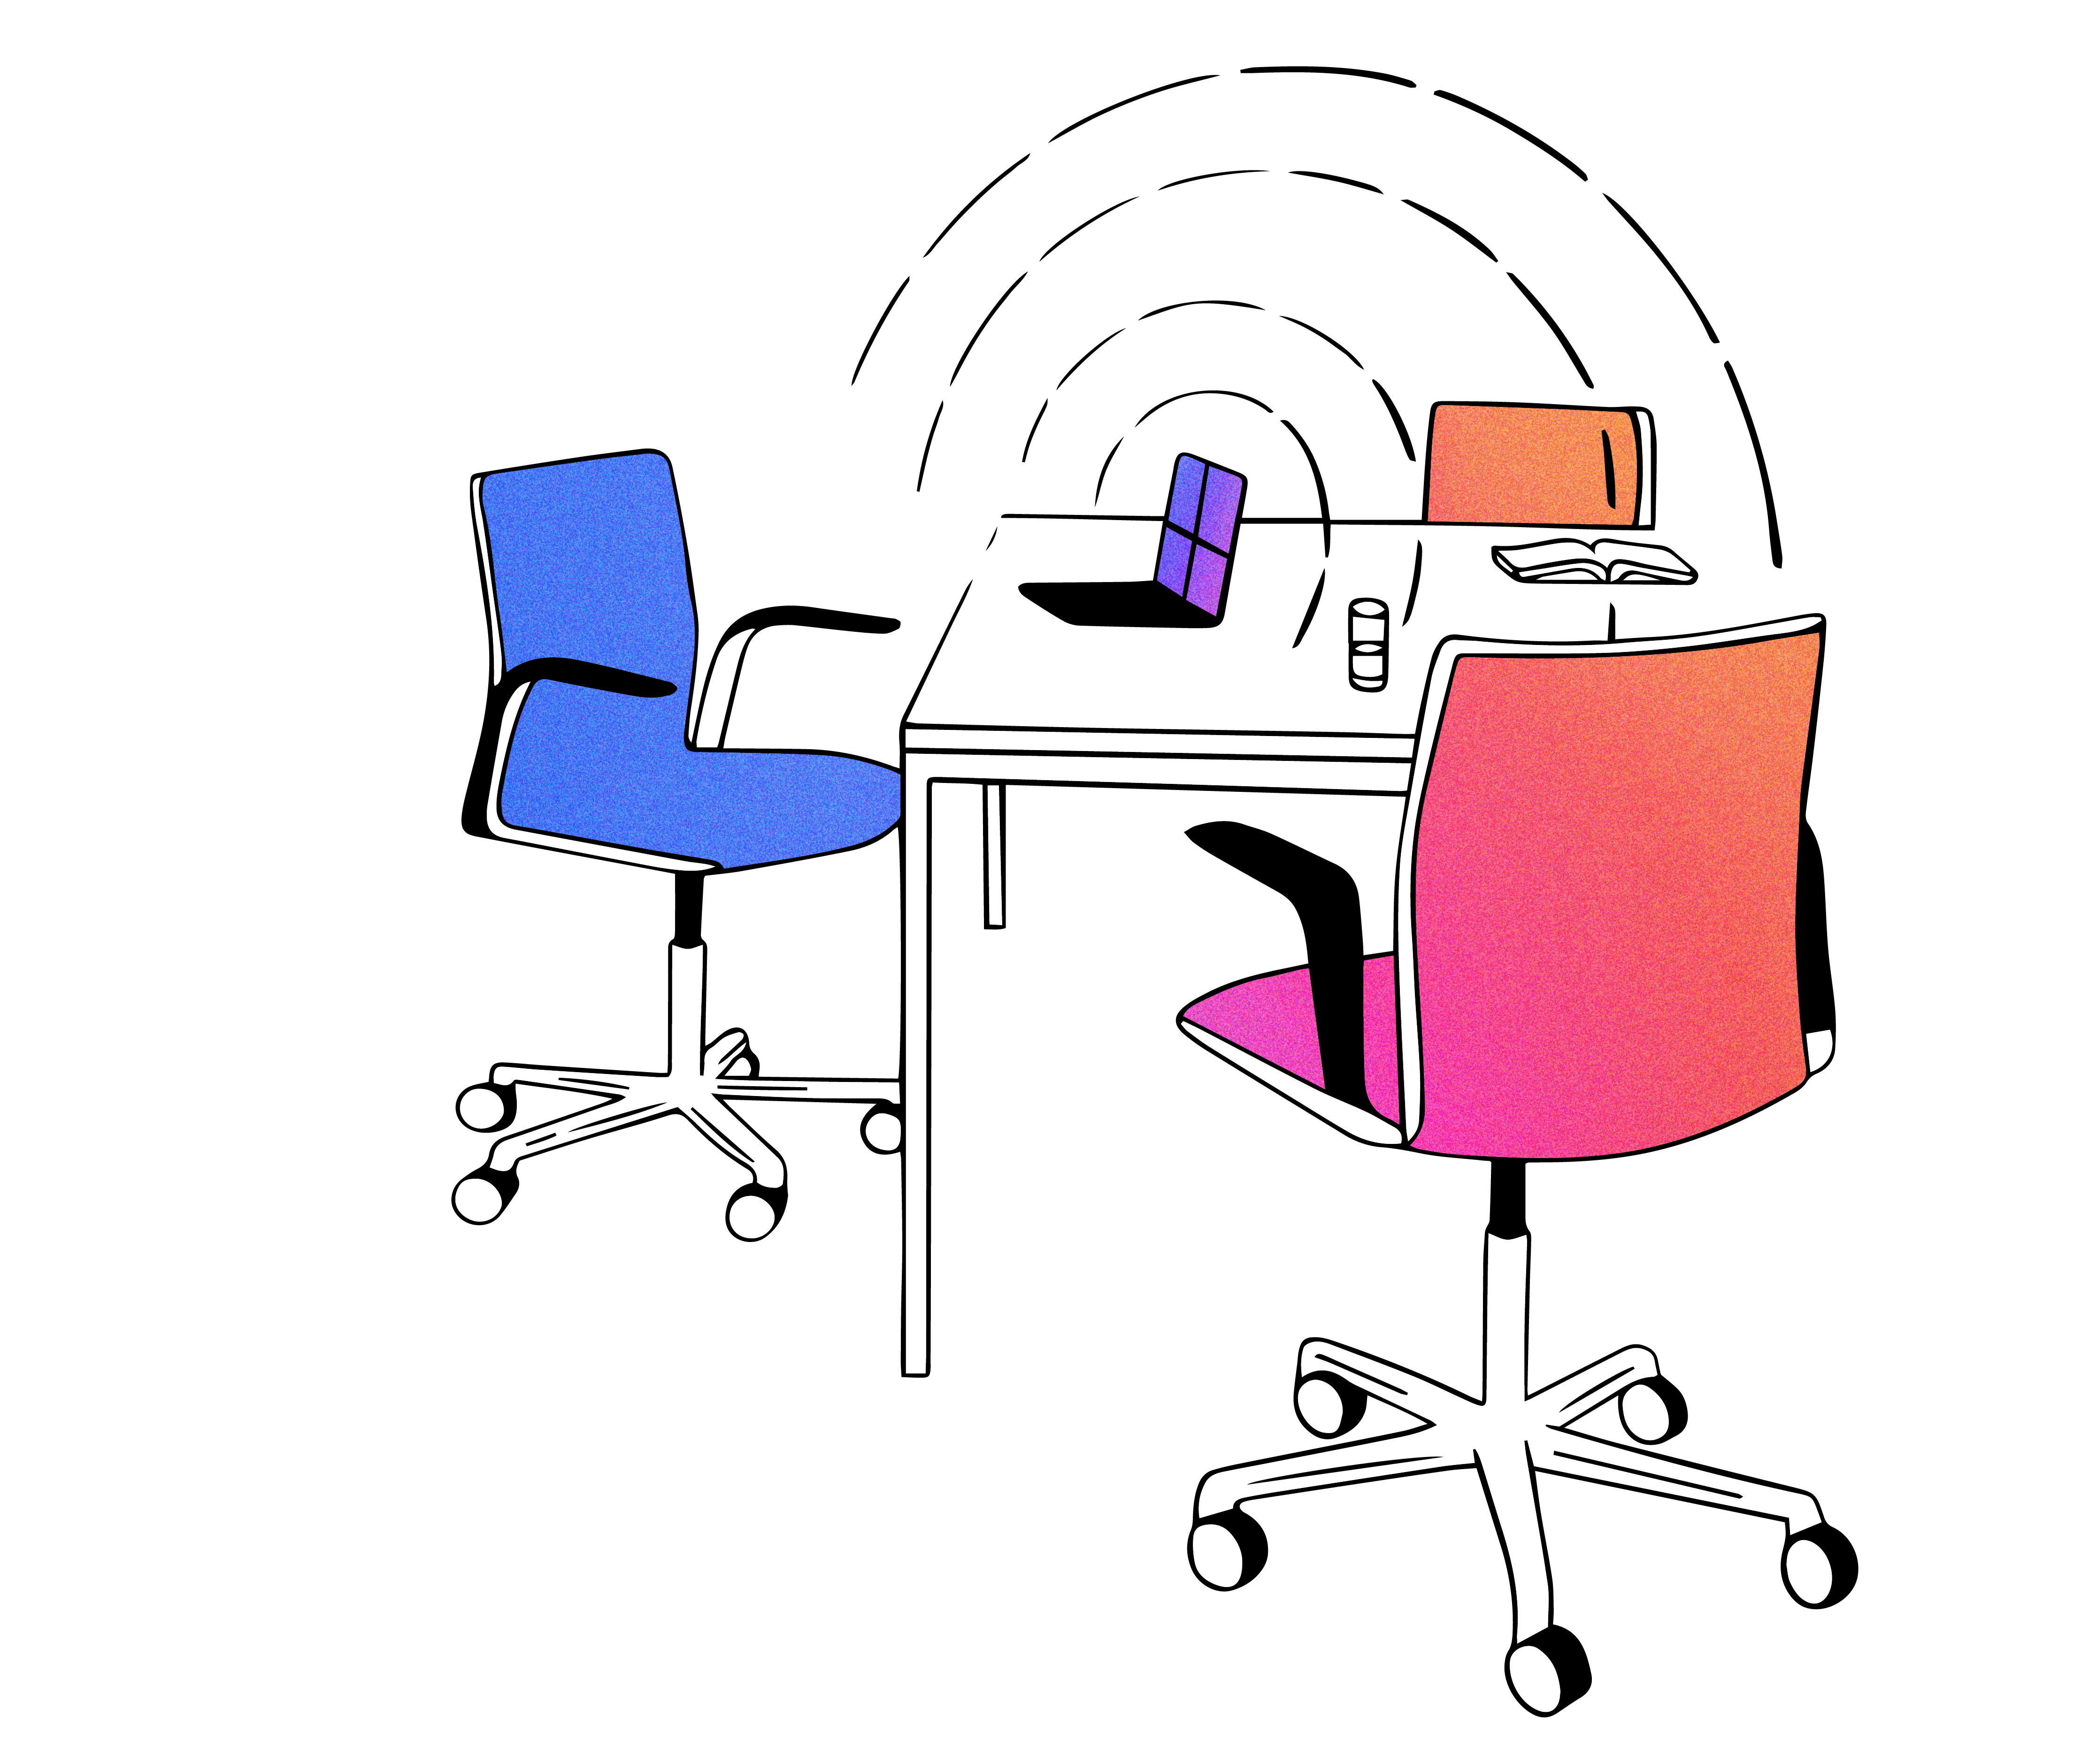 Illustration of connected chairs to illustrate LivePerson's Peer Exchange as an advisory board